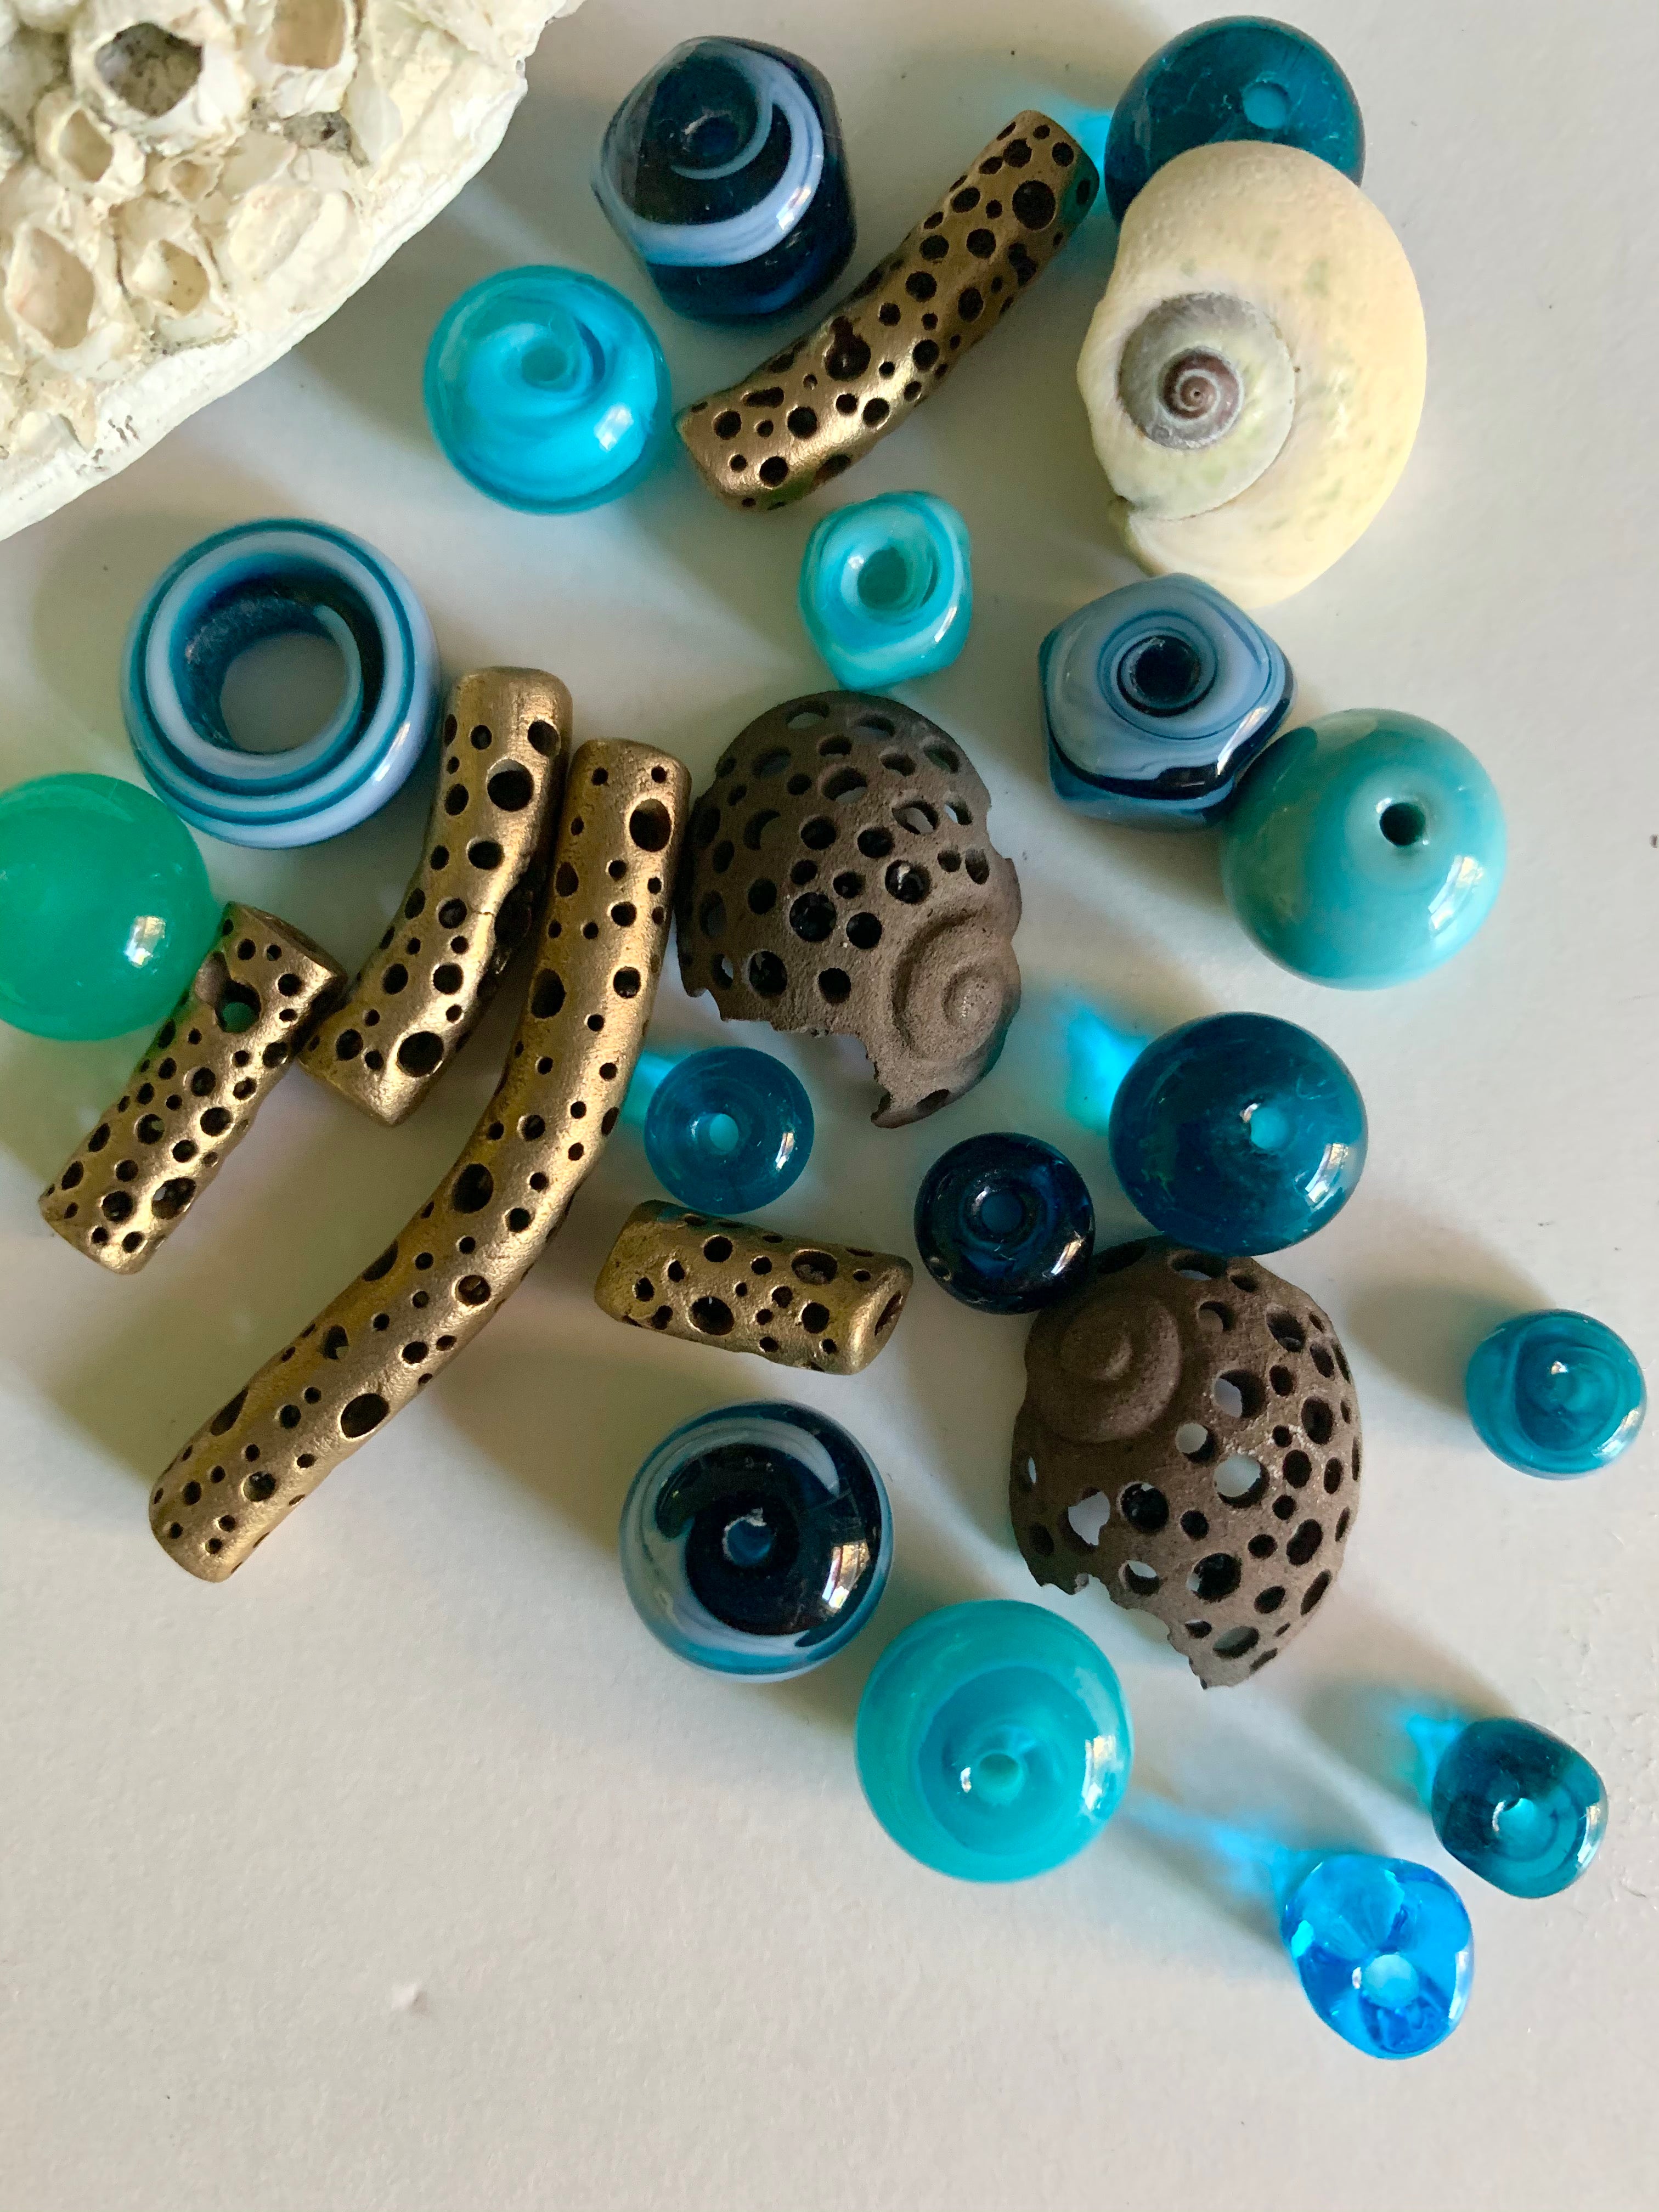 Moonsnail bronze jewelry pieces with blue art beads and seashells